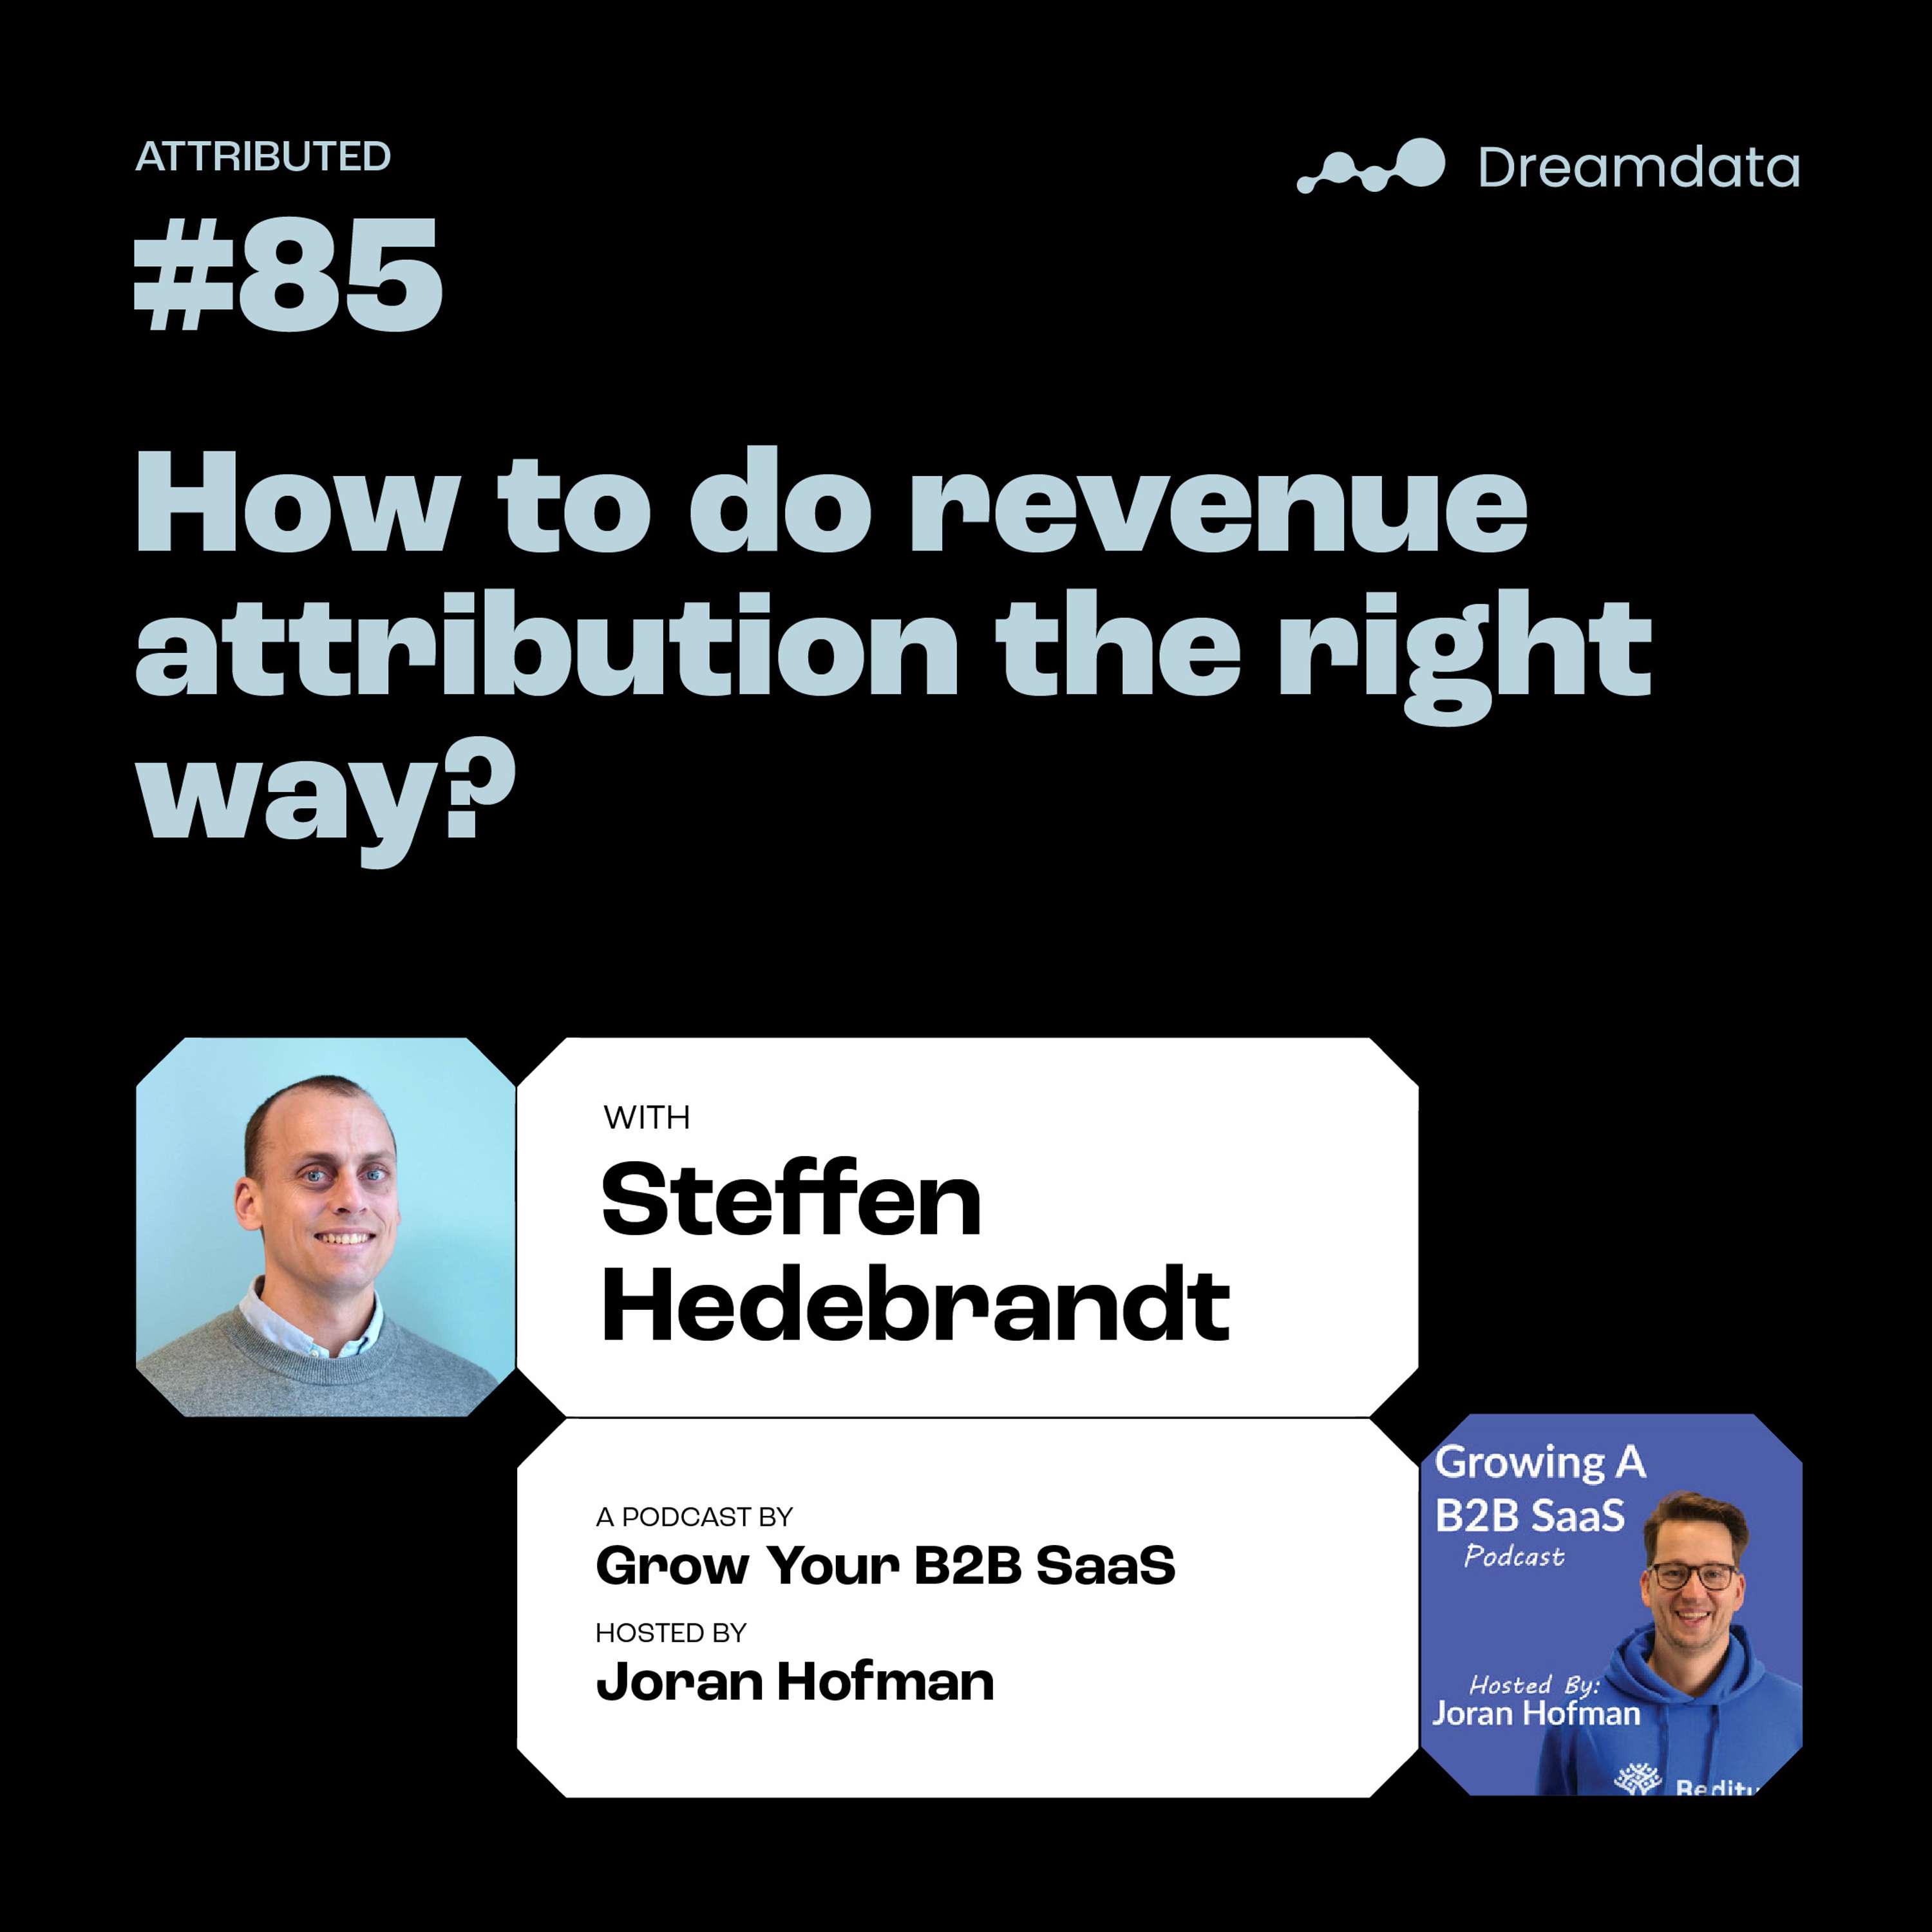 How to do revenue attribution the right way?